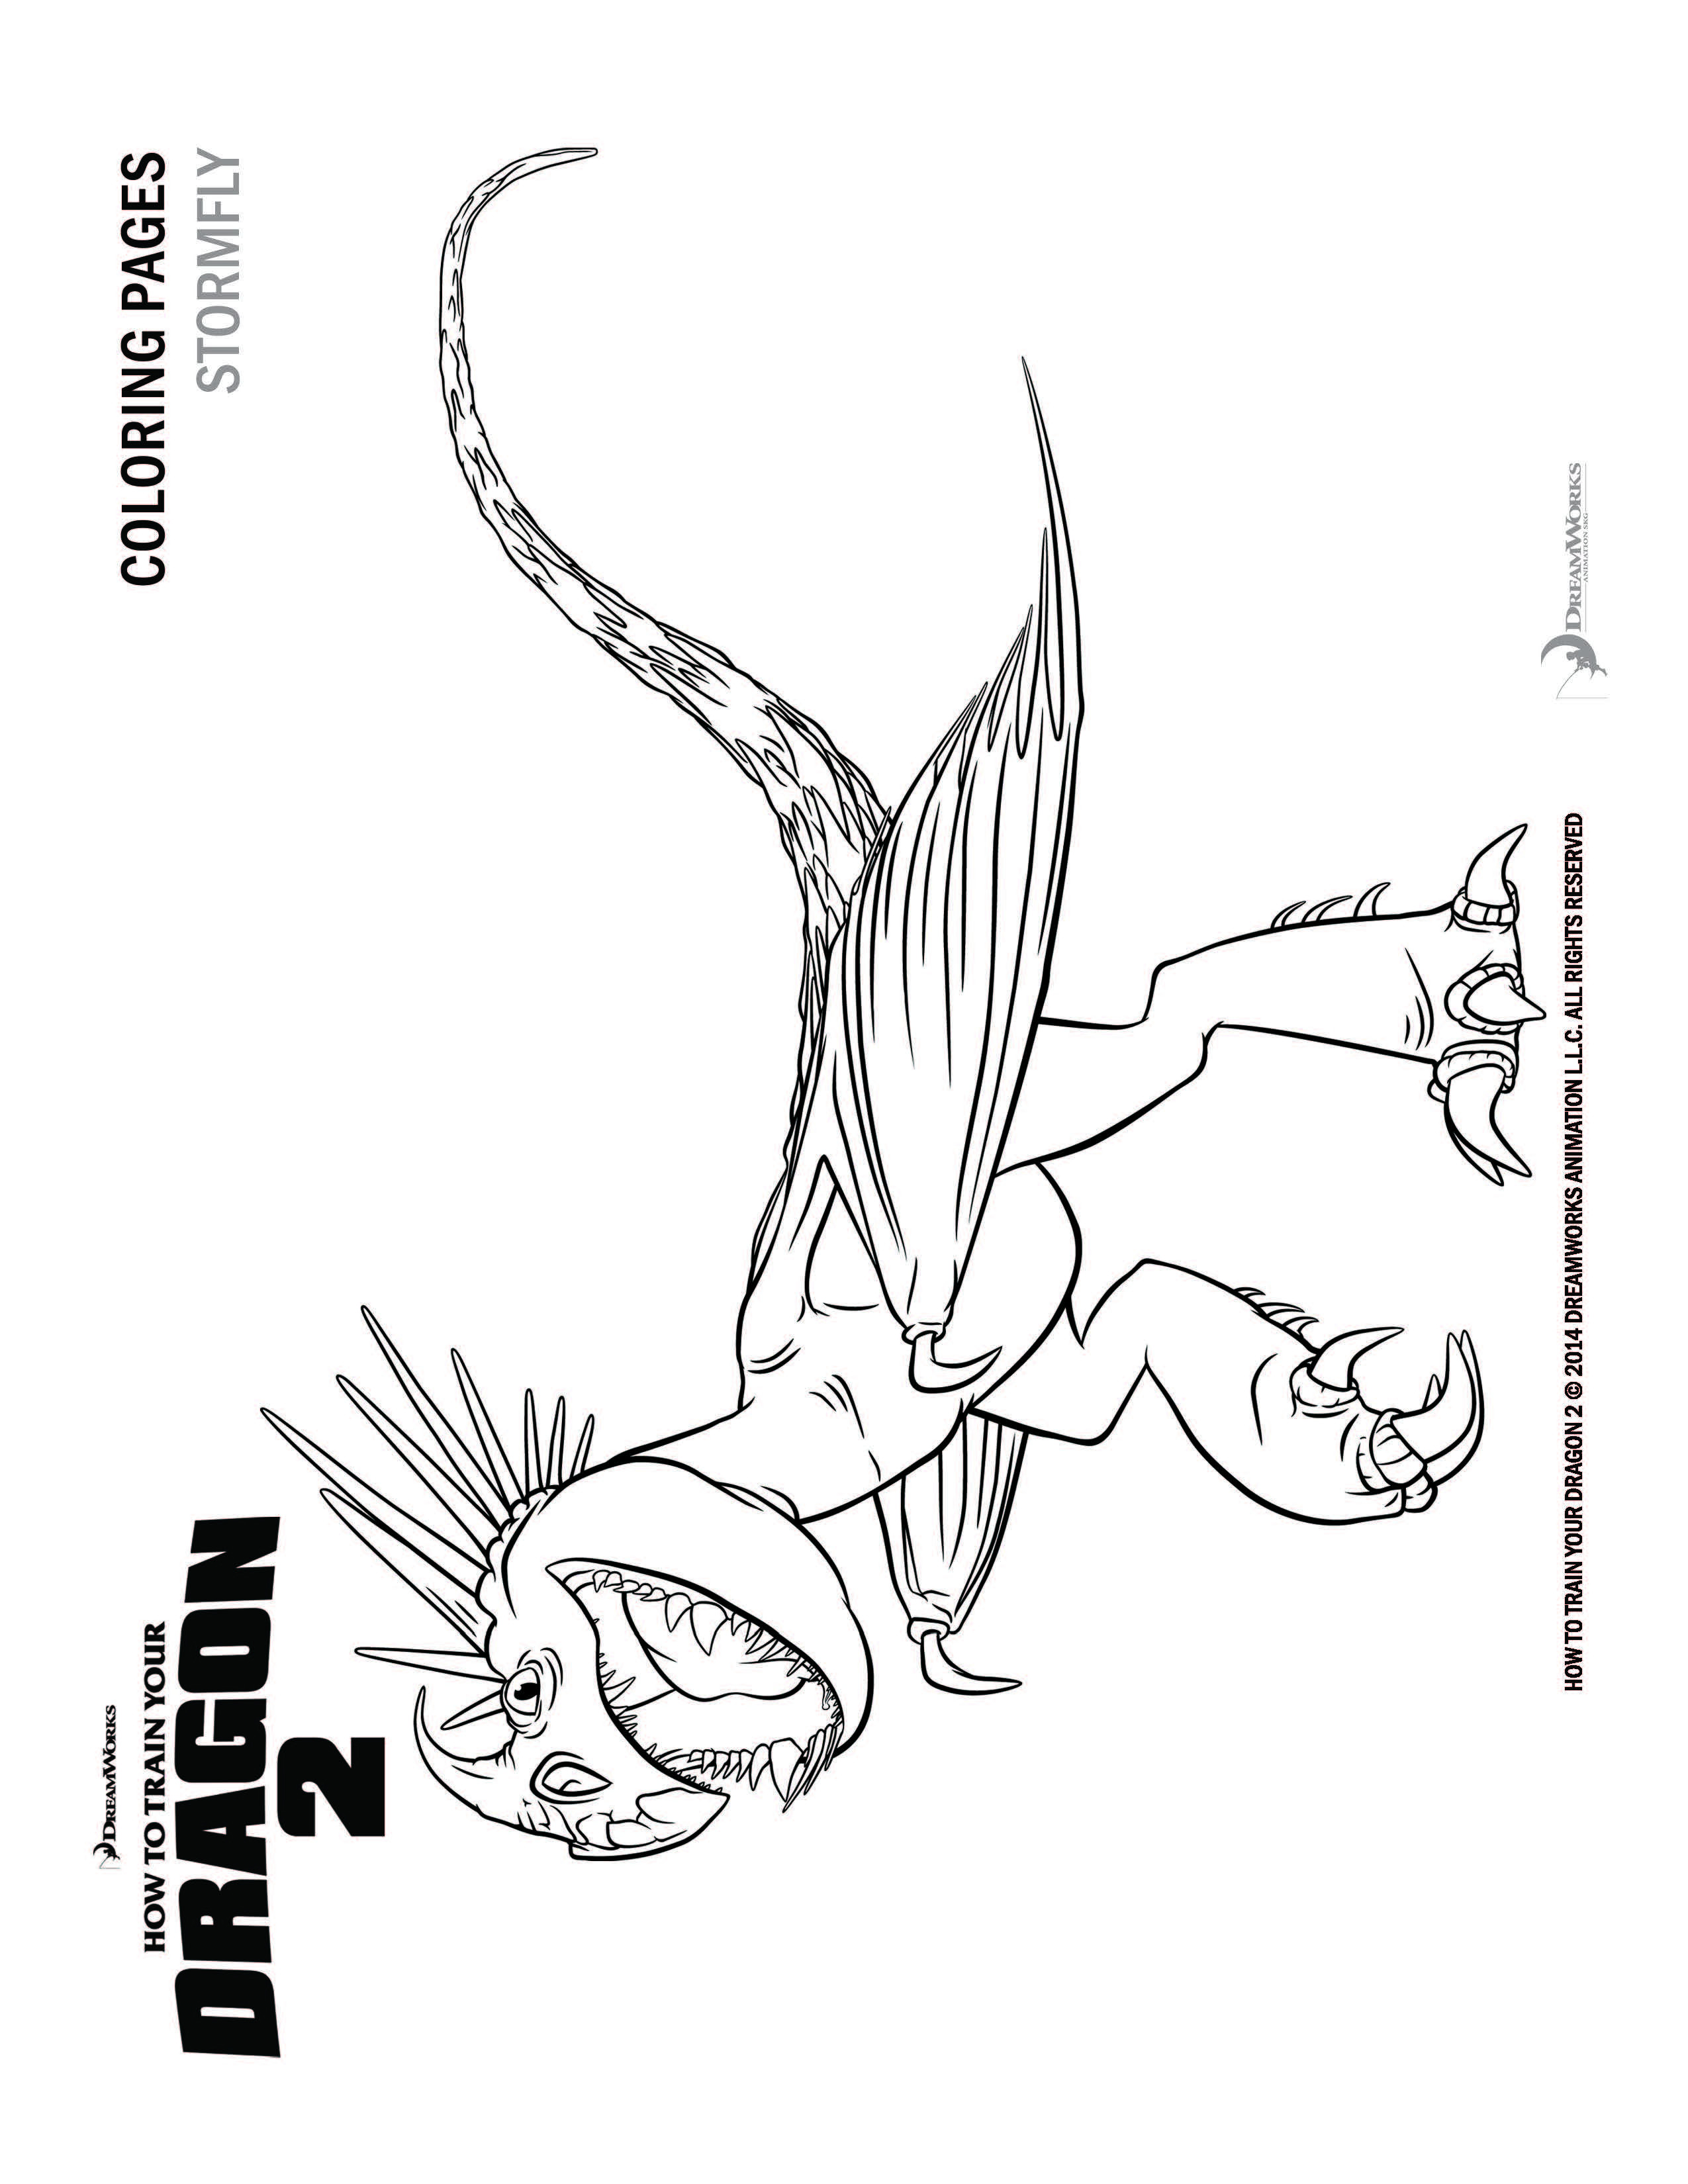 How To Train Your Dragon Coloring Pages
 How to Train Your Dragon coloring pages and activity sheets